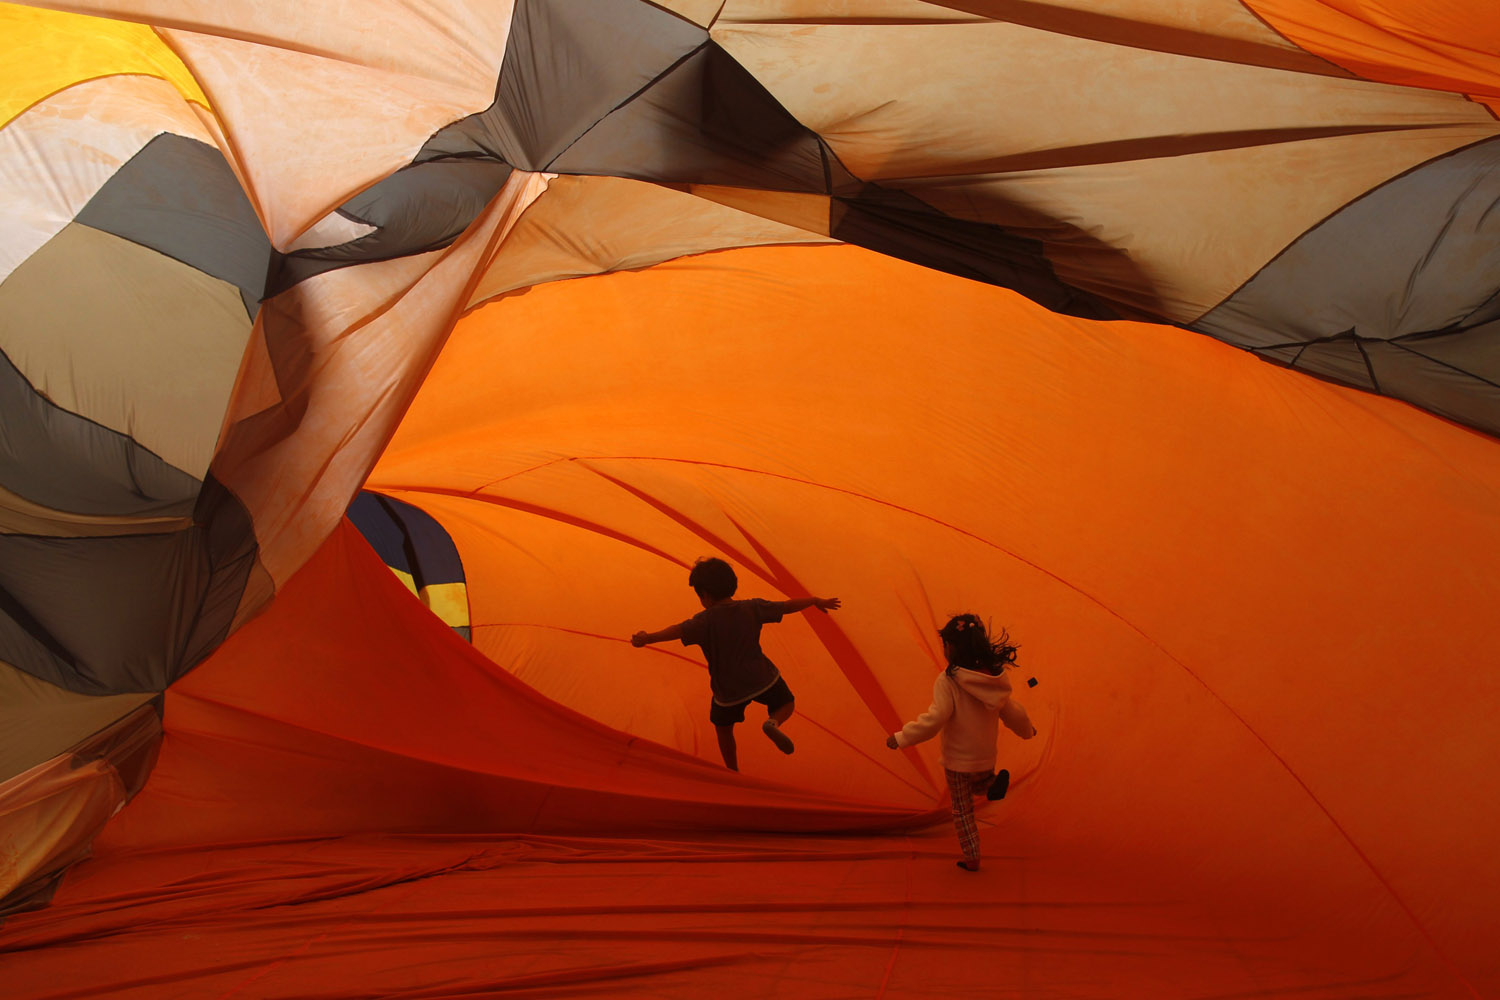 Sept. 29, 2013. Children play inside inflatable installations at the Casa Daros museum in Rio de Janeiro.